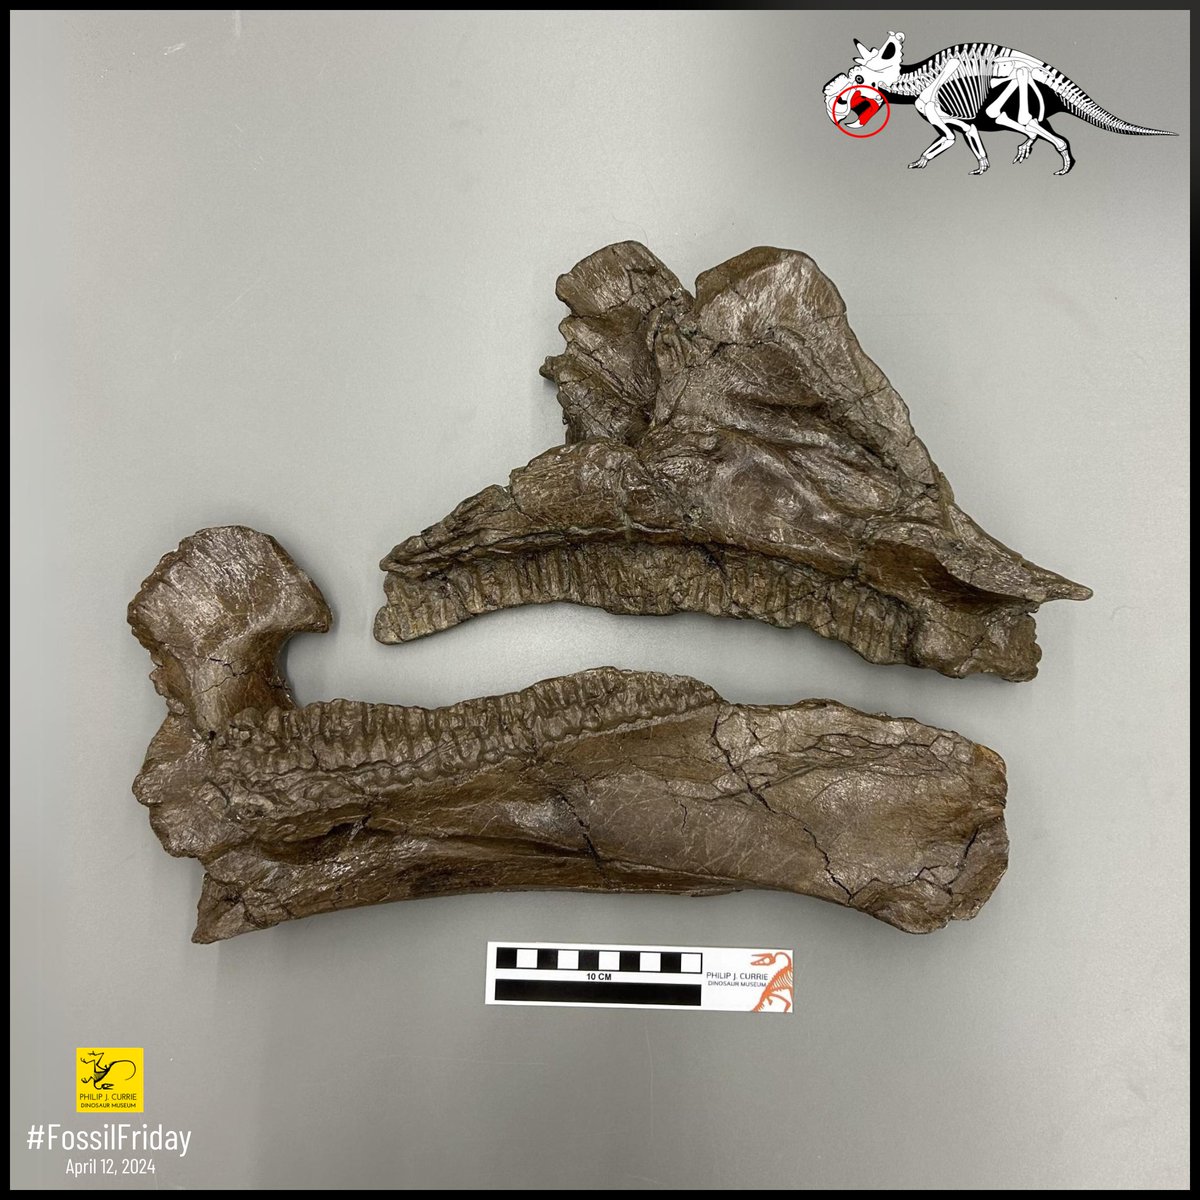 #FossilFriday These two fossils are a Pachyrhinosaurus maxilla and dentary, which are the upper and lower jaws. The grooved tooth sockets aligned, so as the jaws moved, the teeth sliced against each other like scissors. This ability to chew allowed Pachyrhinosaurs to thrive.